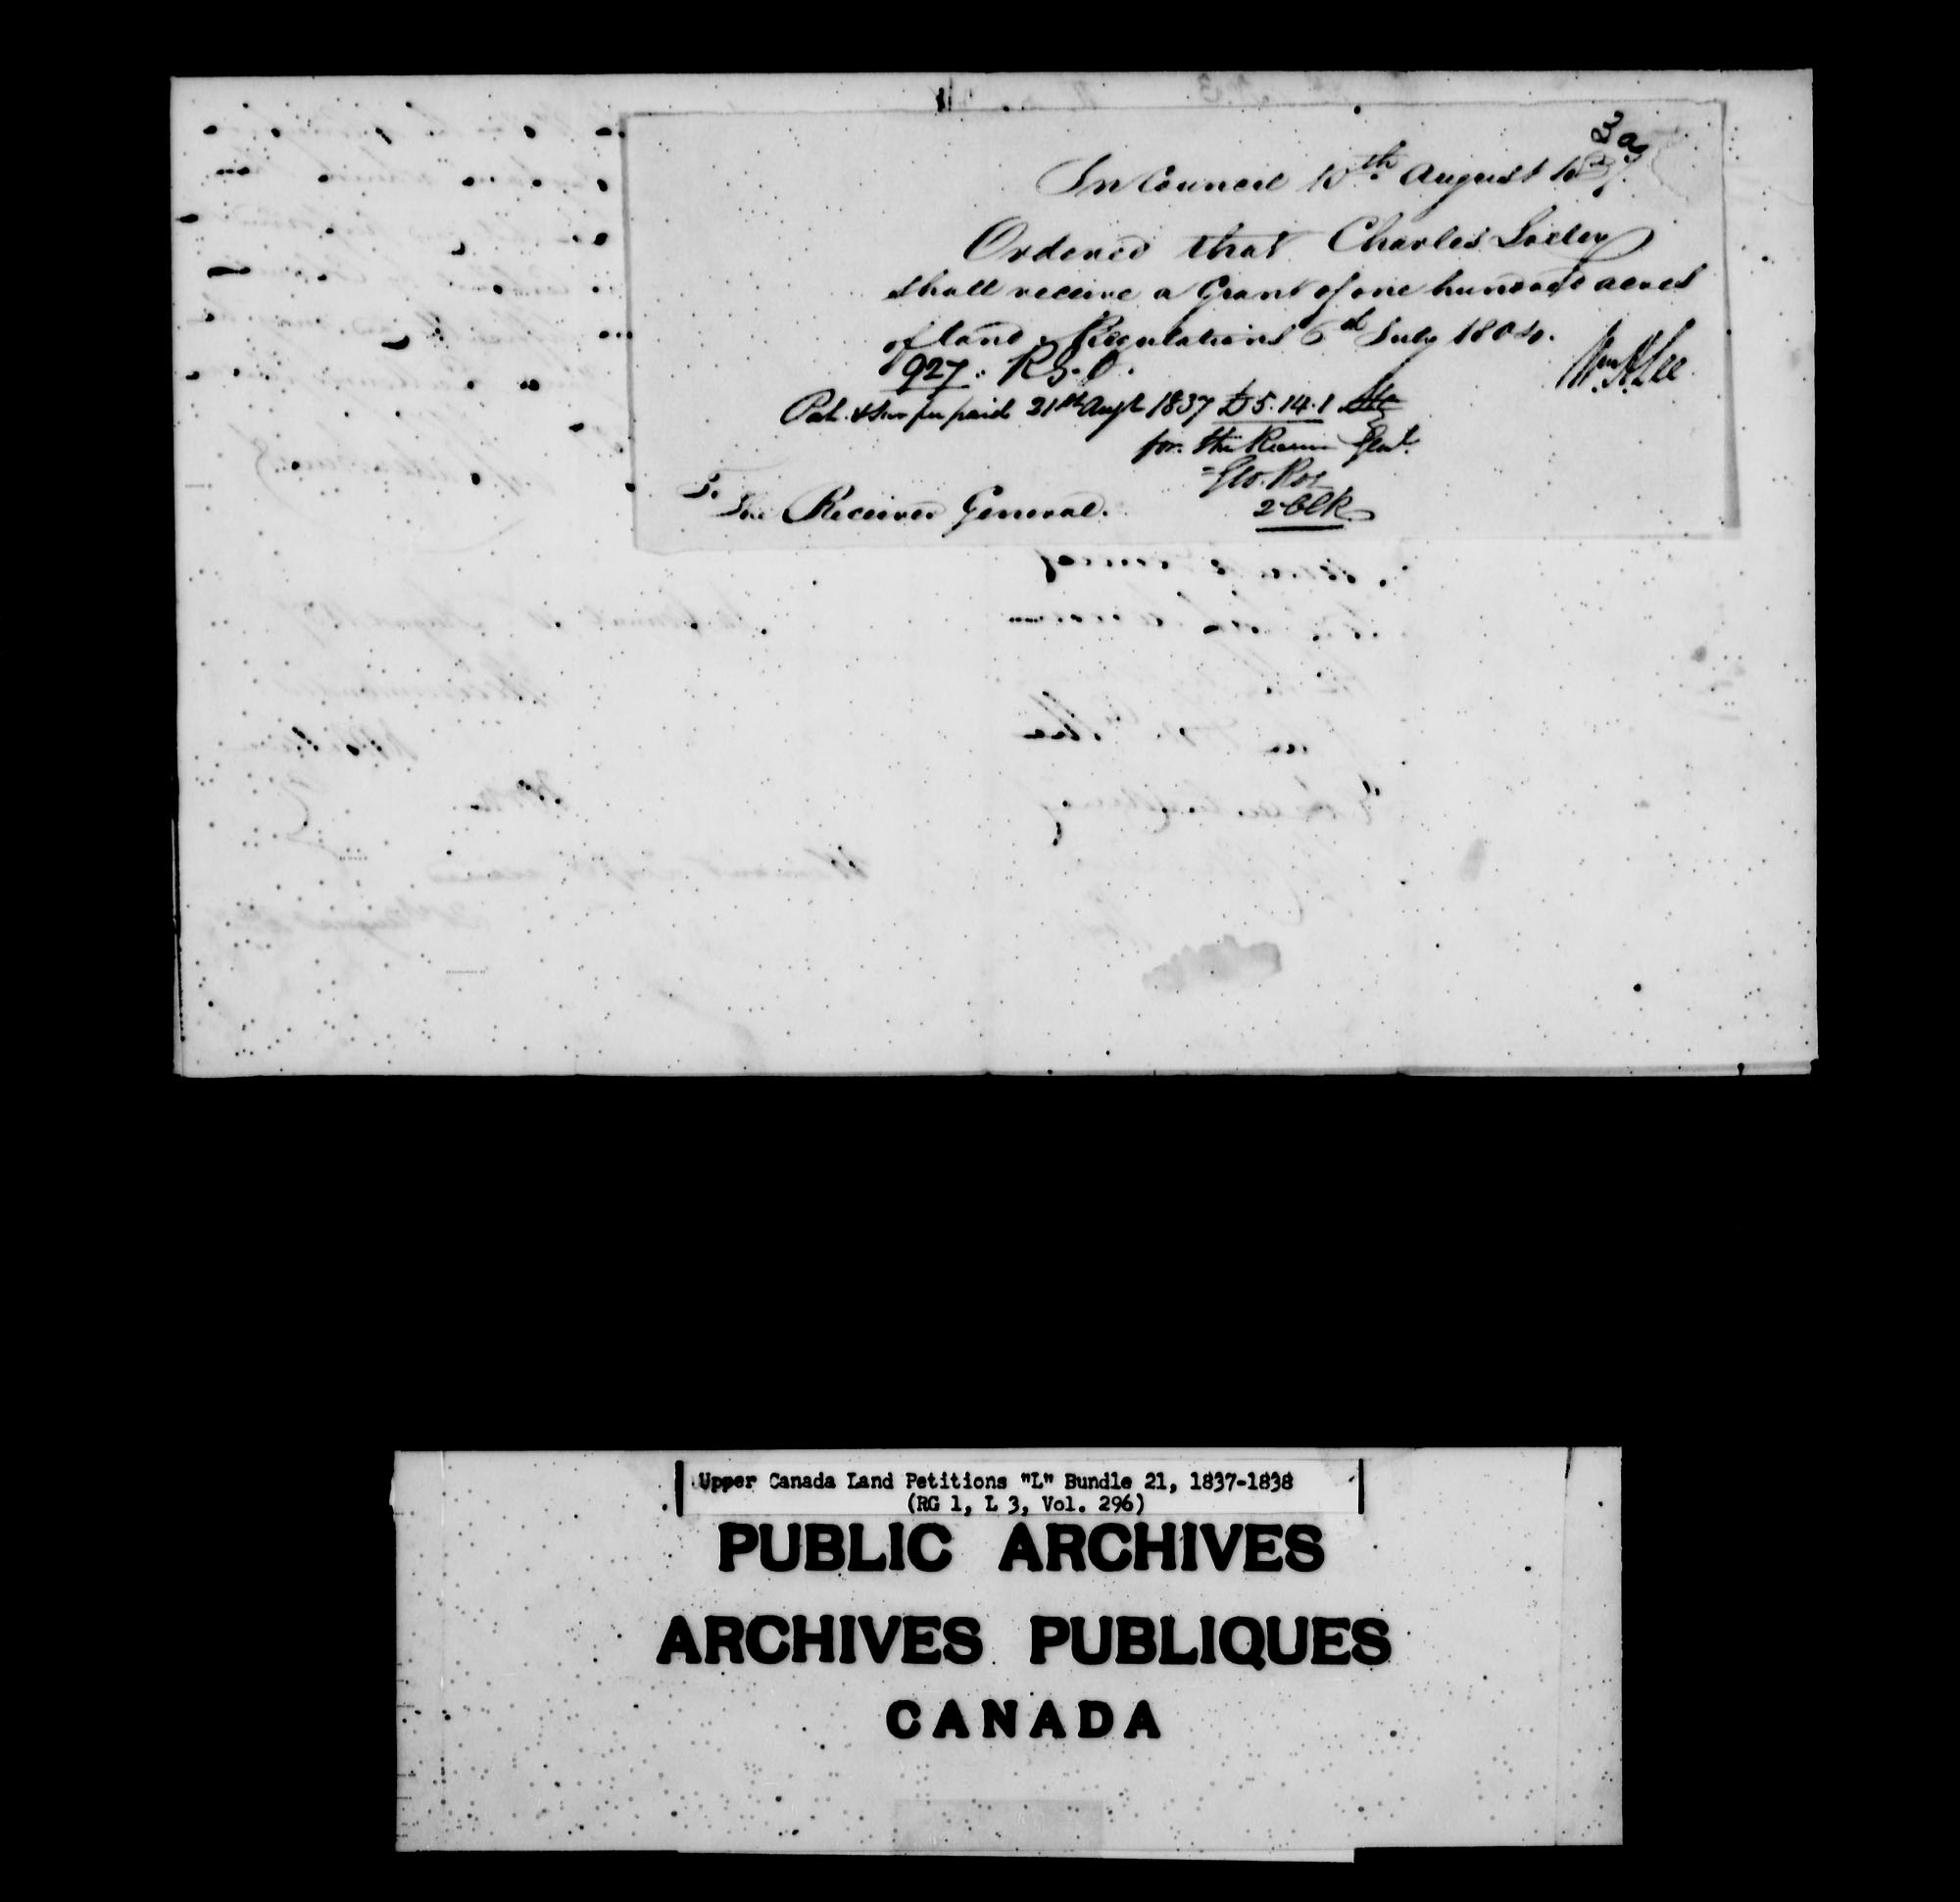 Title: Upper Canada Land Petitions (1763-1865) - Mikan Number: 205131 - Microform: c-2131